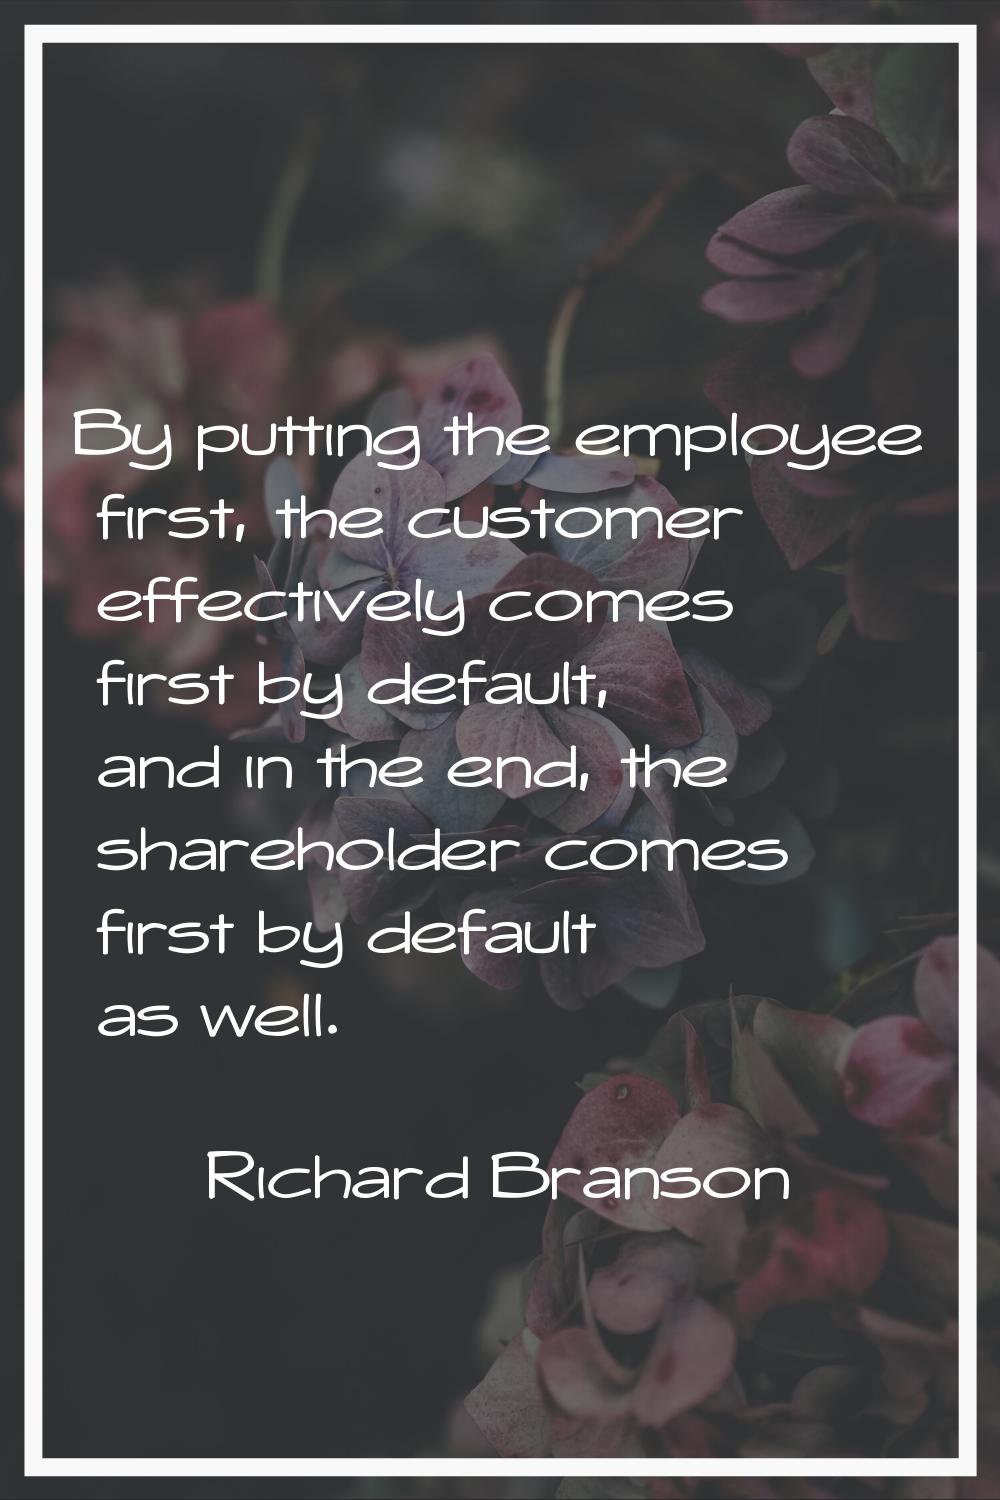 By putting the employee first, the customer effectively comes first by default, and in the end, the